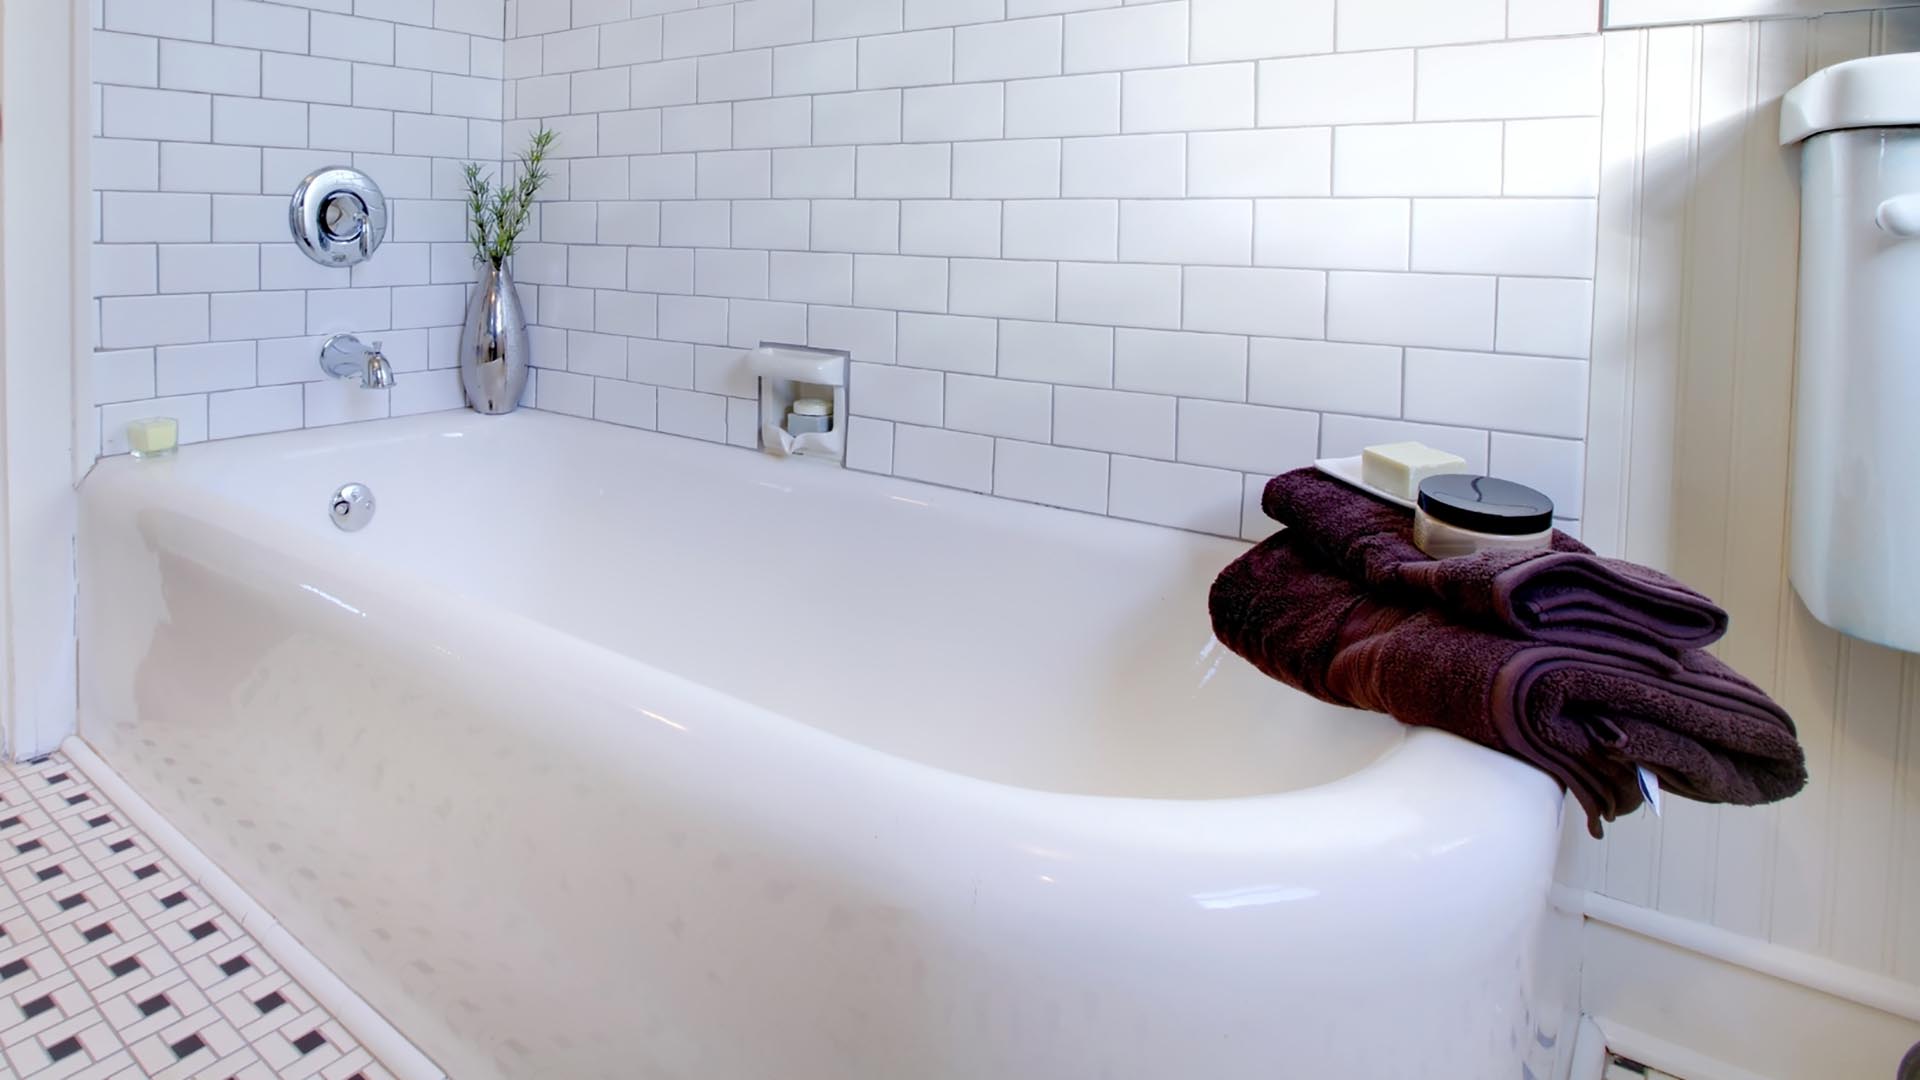 How To Remove A Cast Iron Tub Today S, How Do I Break Up A Cast Iron Bathtub